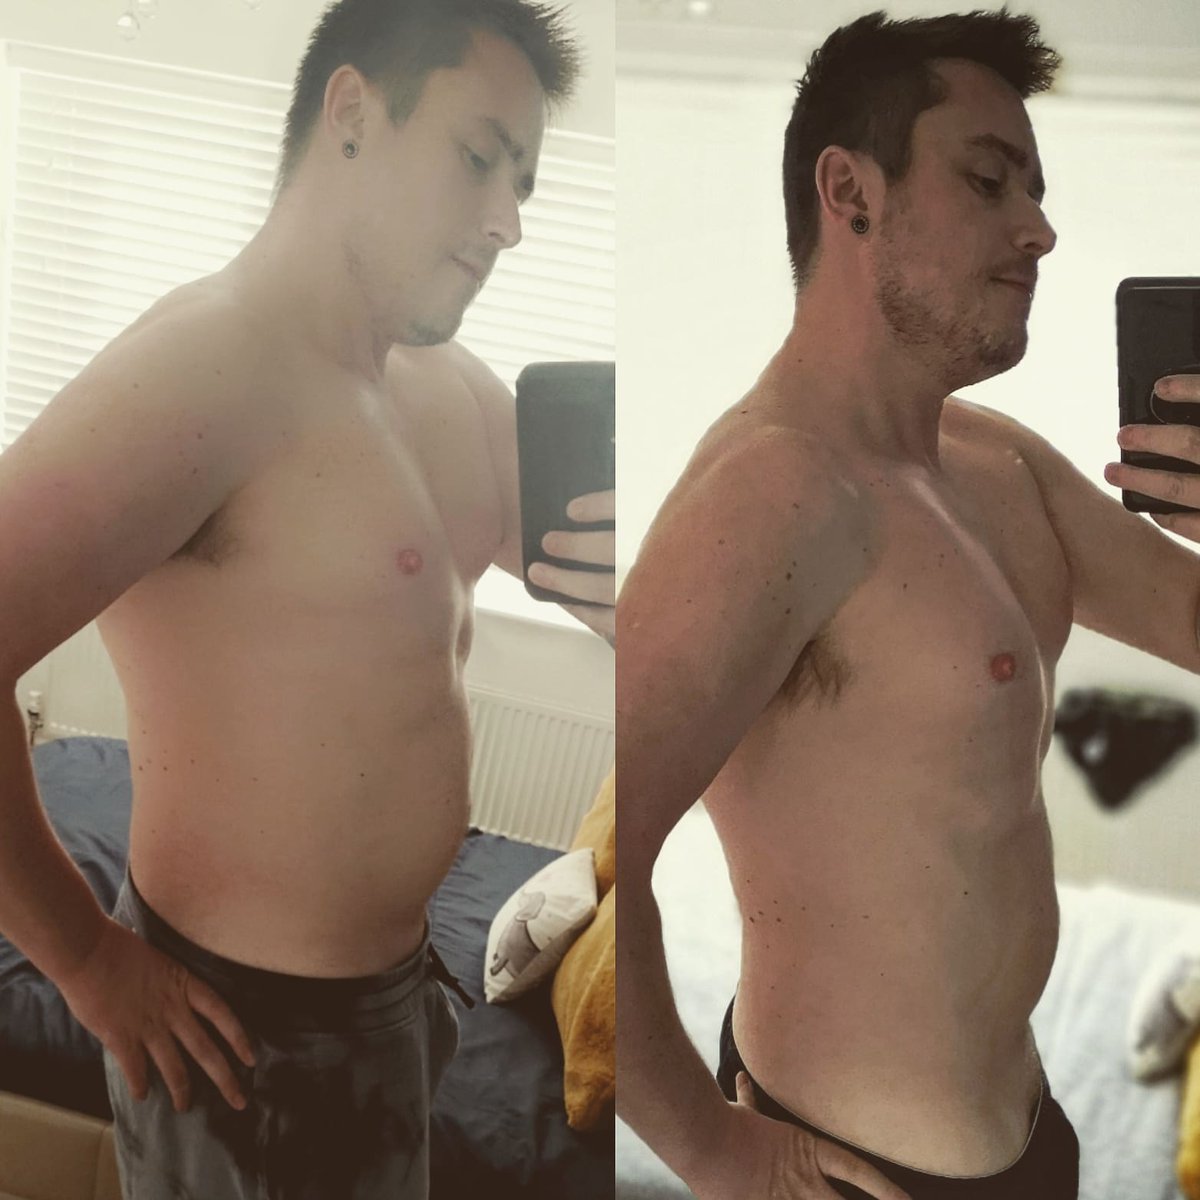 Progress photo.... More defined, feeling fitter, full of energy and much much. More confident.... LESGO

#transformation #weightloss #healthkick